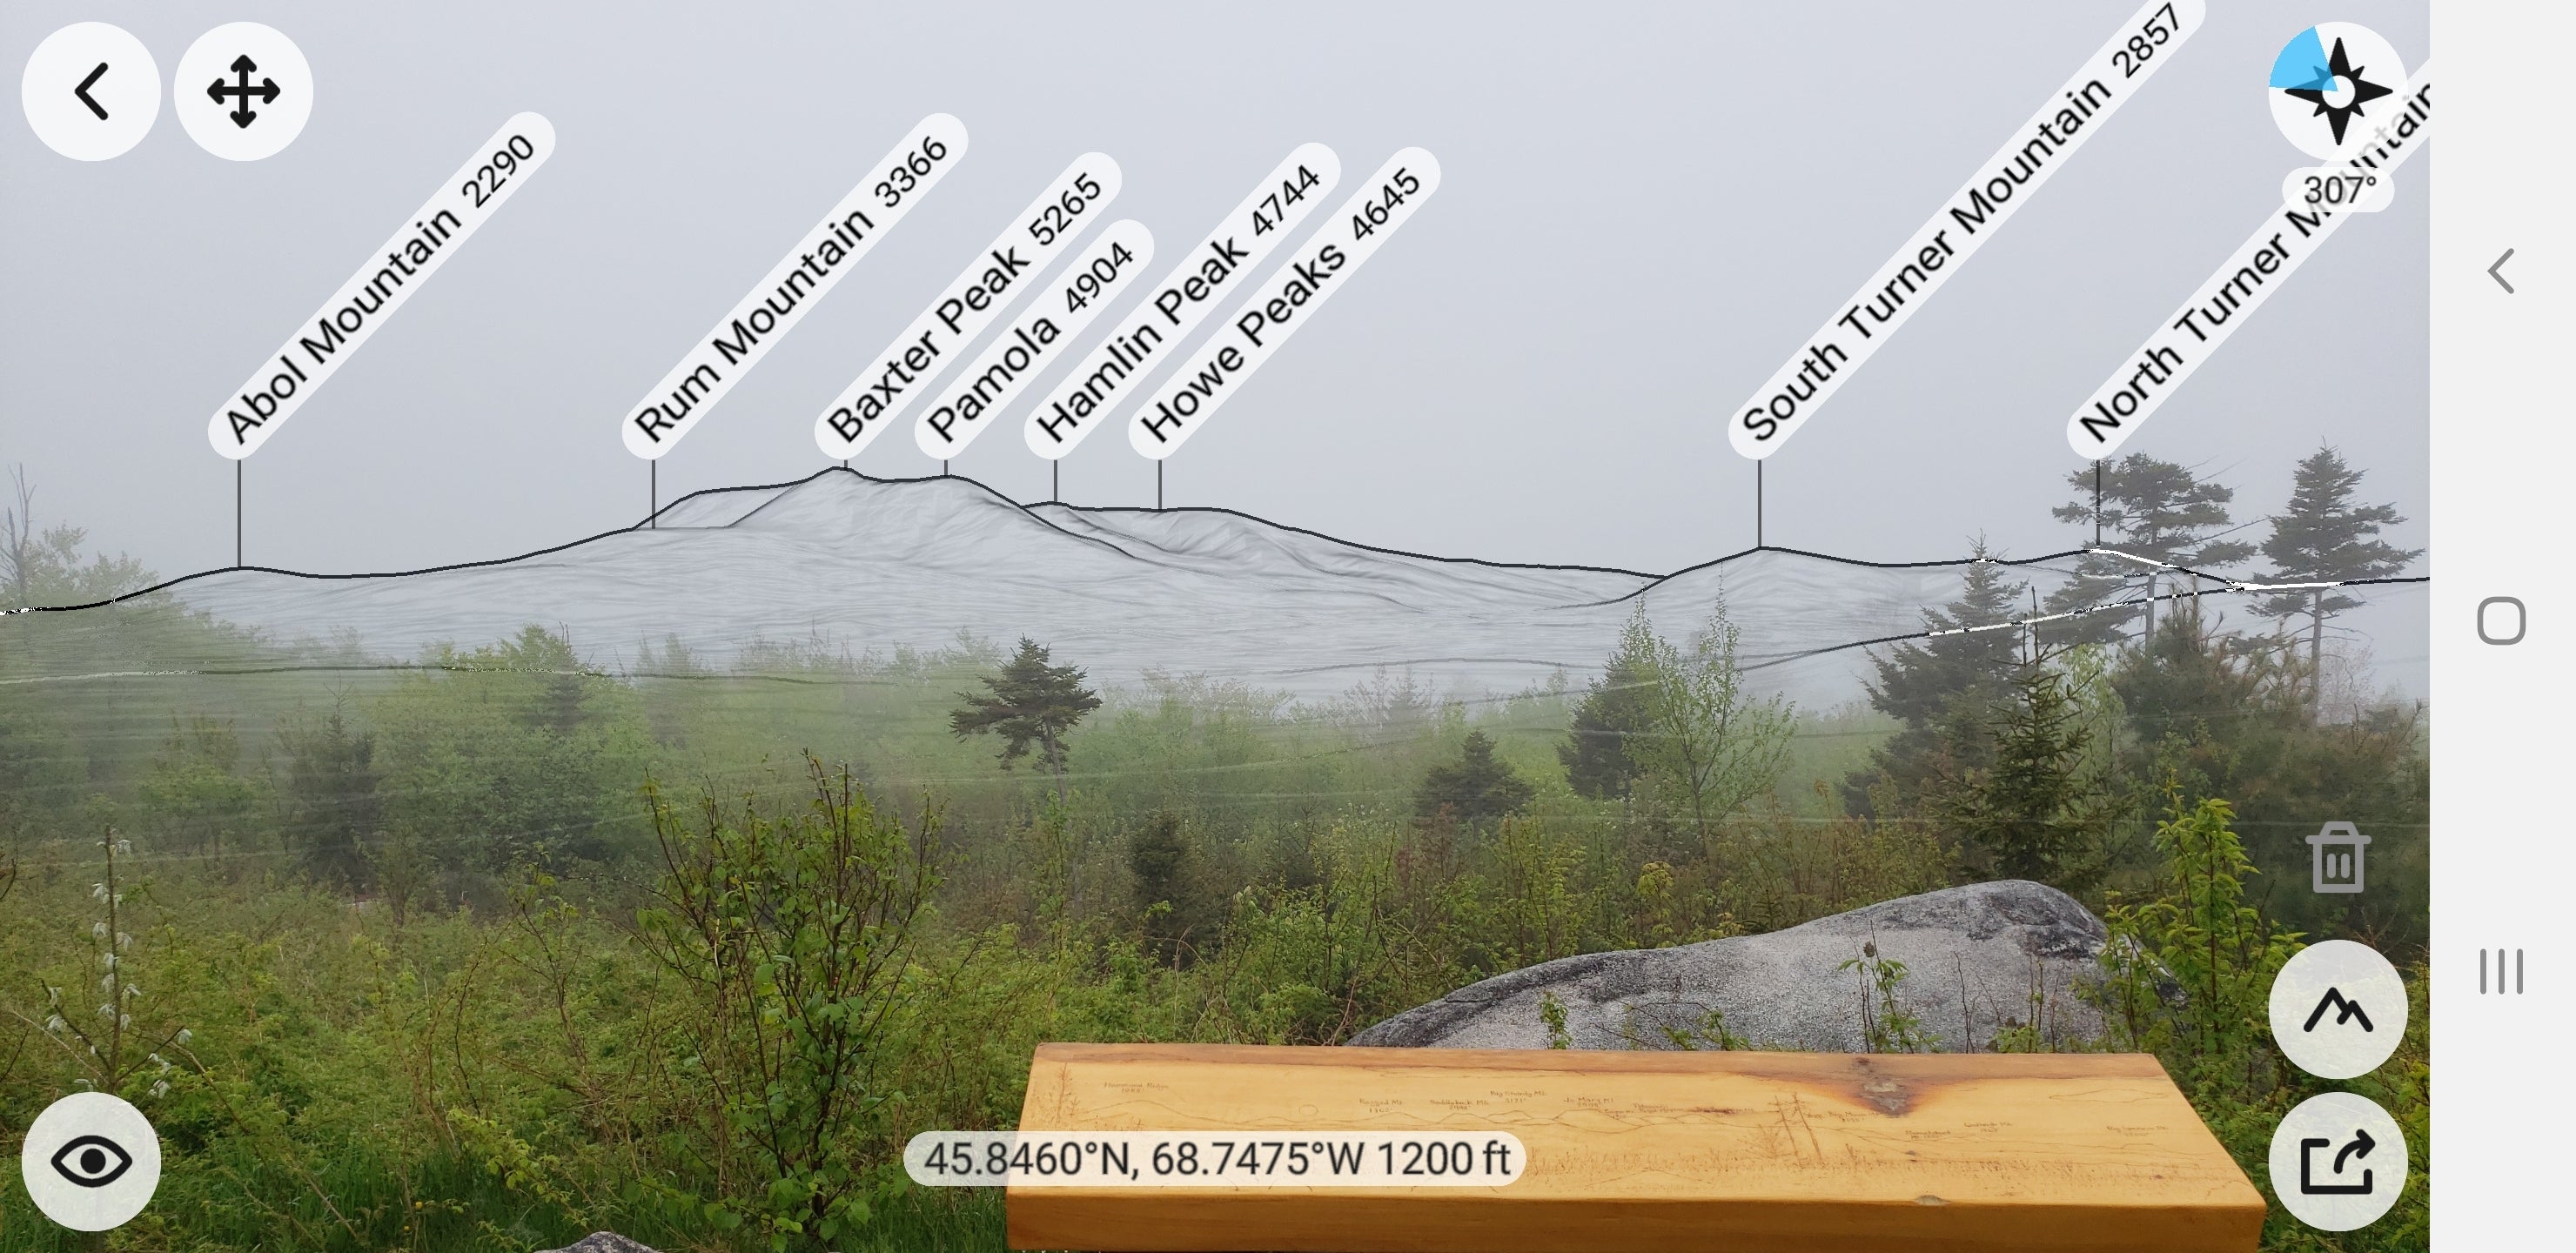 Had to use an app to help me imagine Mt Katahdin in the distance in this low visibility day!